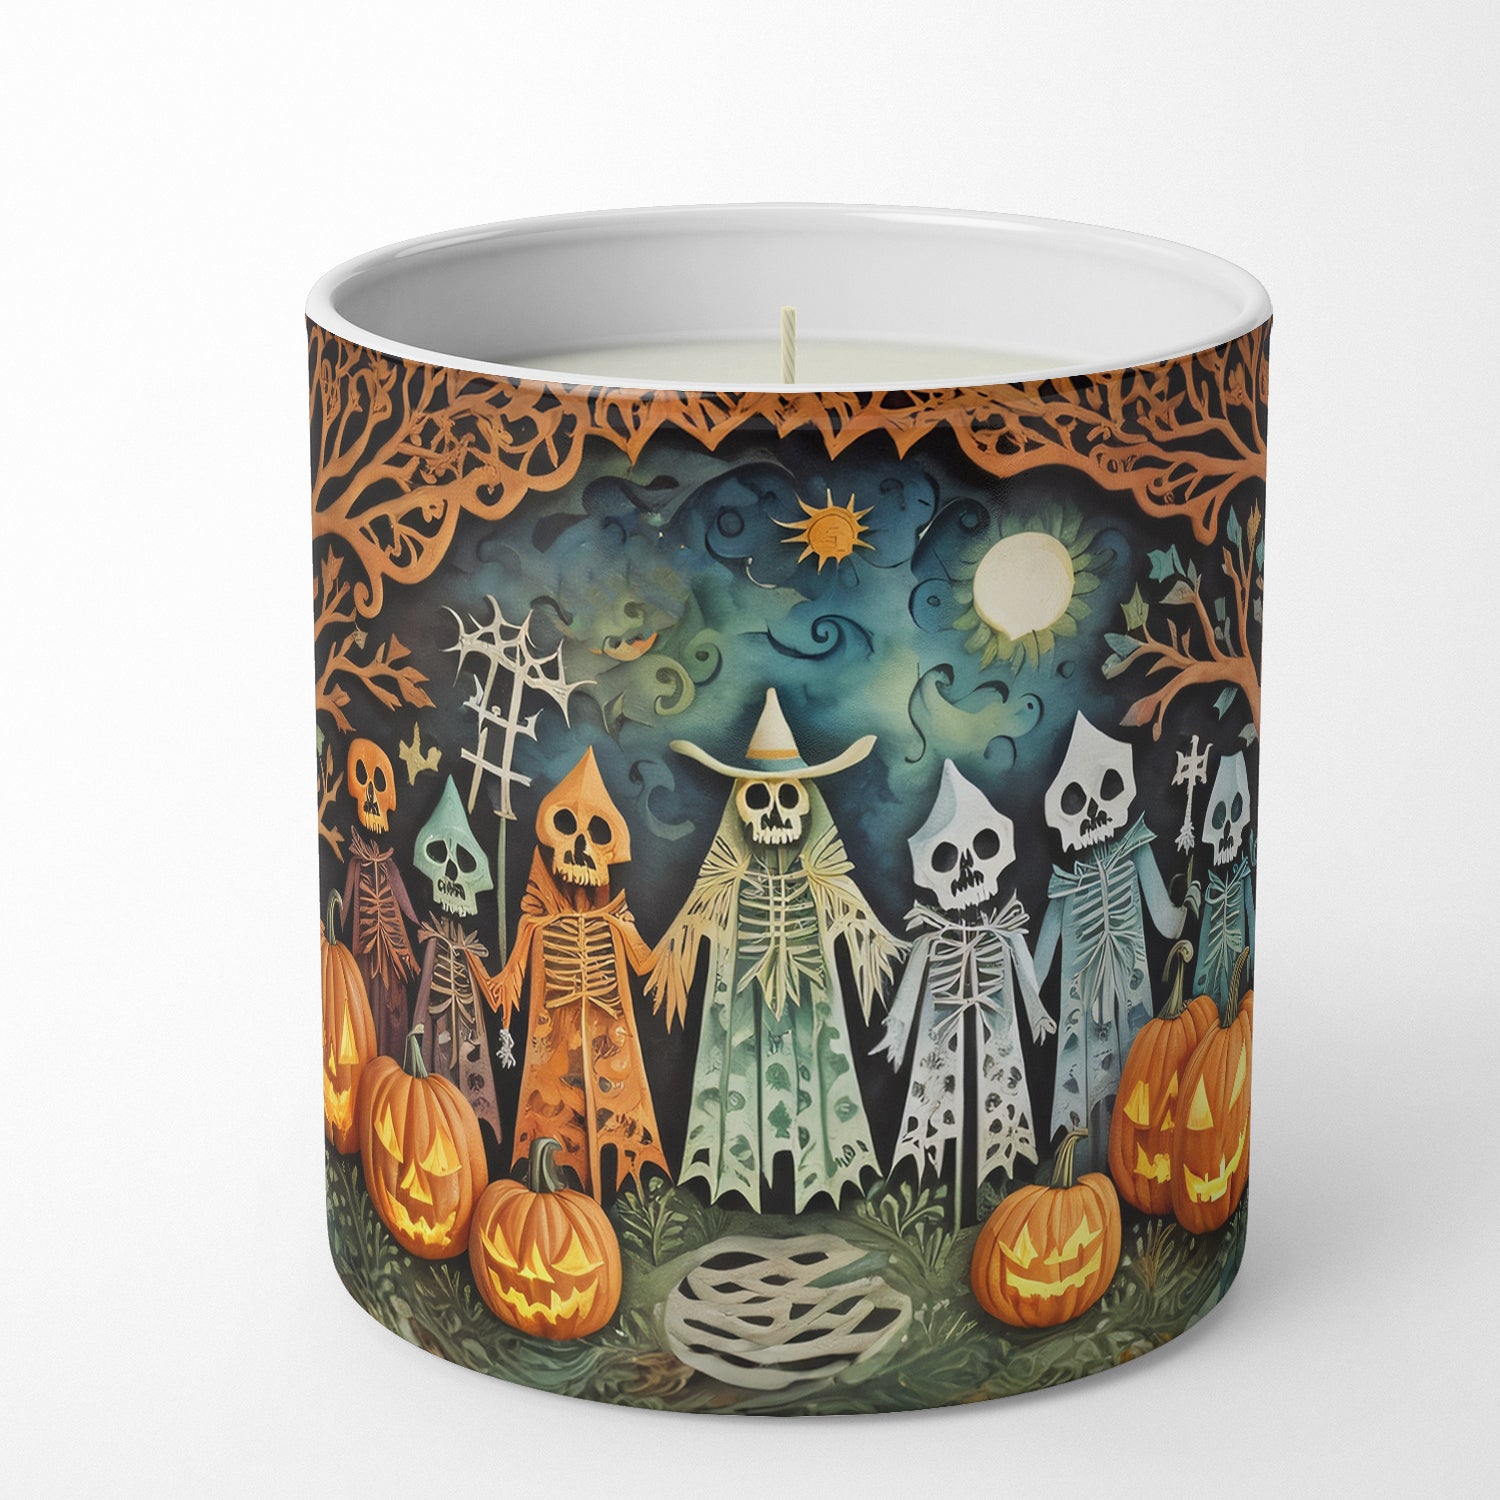 Buy this Papel Picado Skeletons Spooky Halloween Decorative Soy Candle